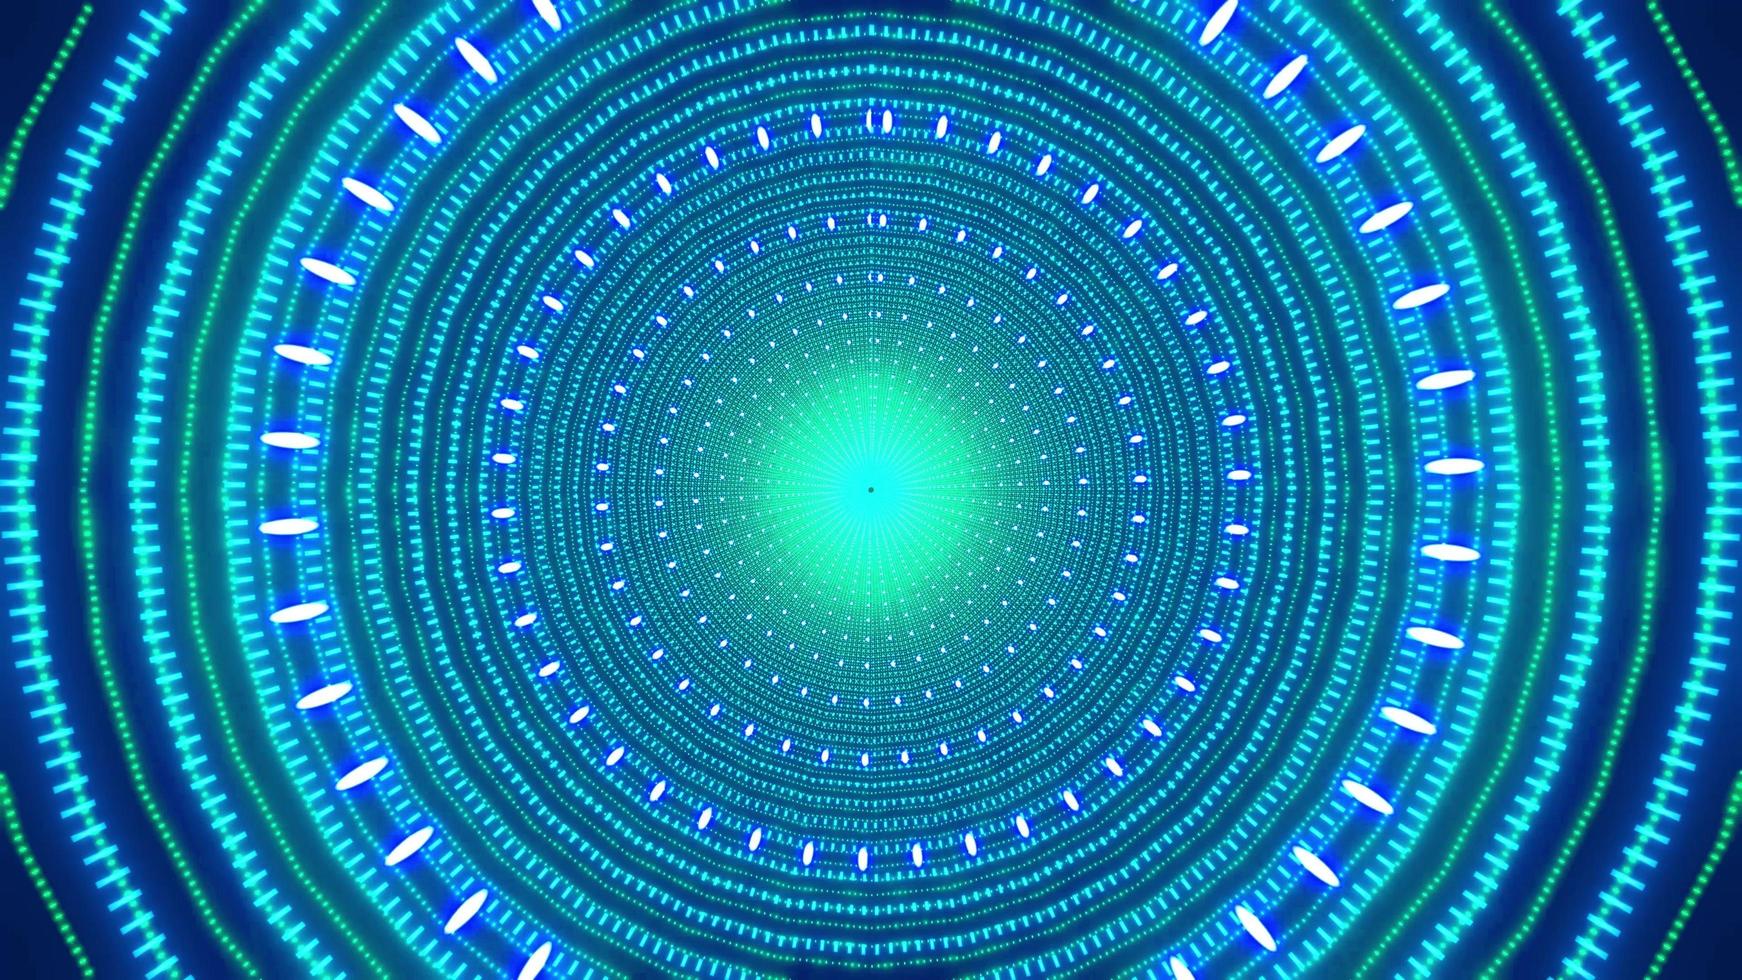 Concentric blue circles 3d illustration kaleidoscope design for background or wallpaper photo